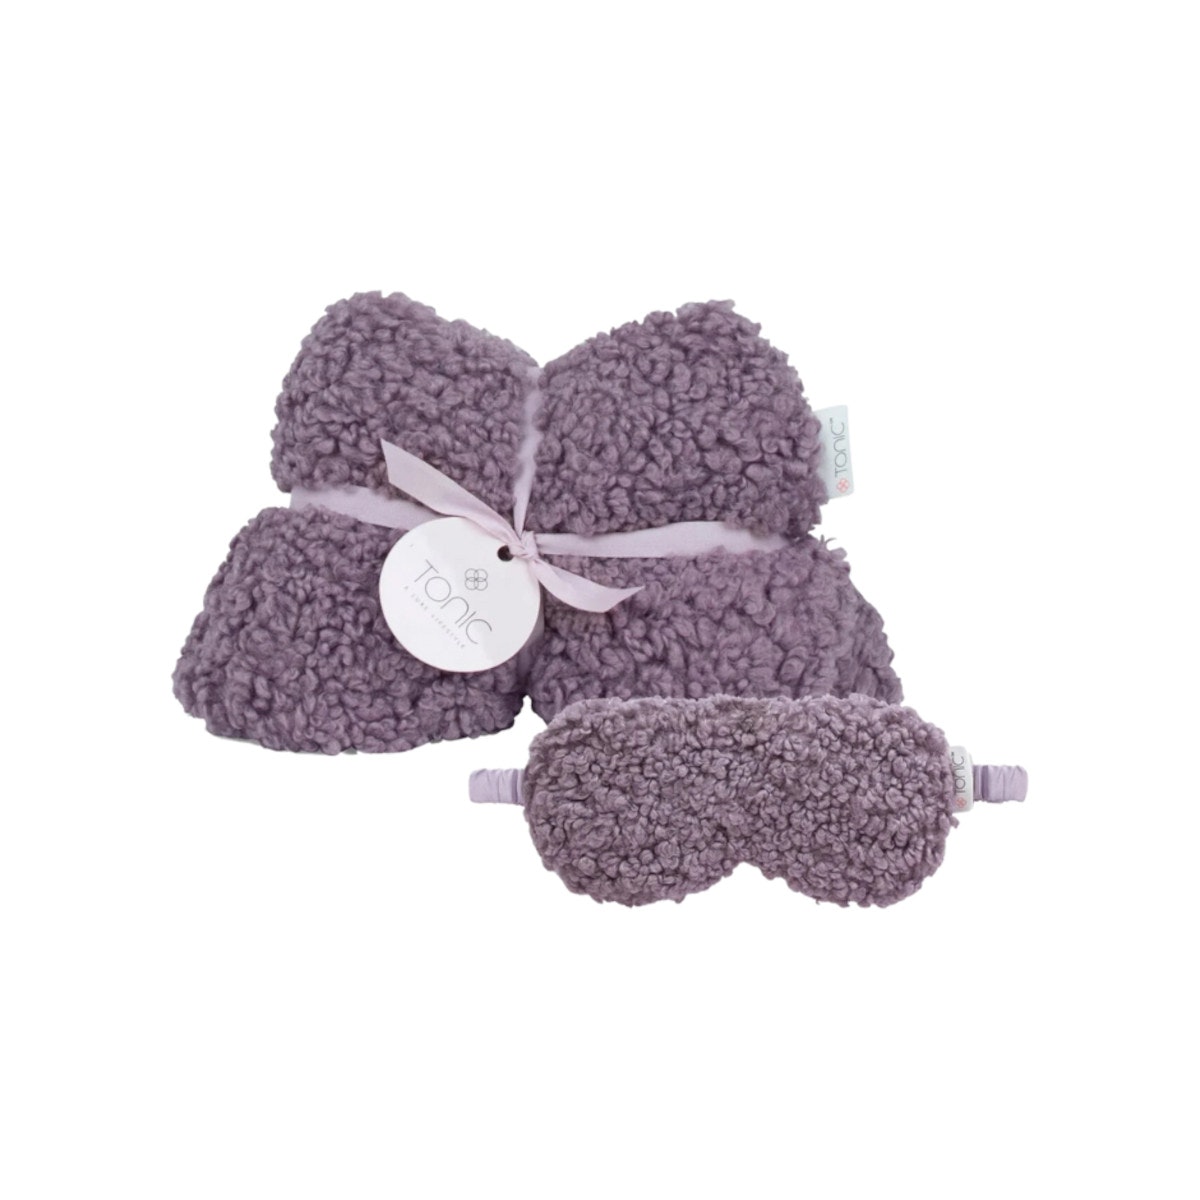 Tonic Relax & Unwind Gift Pack - Boucle Wisteria